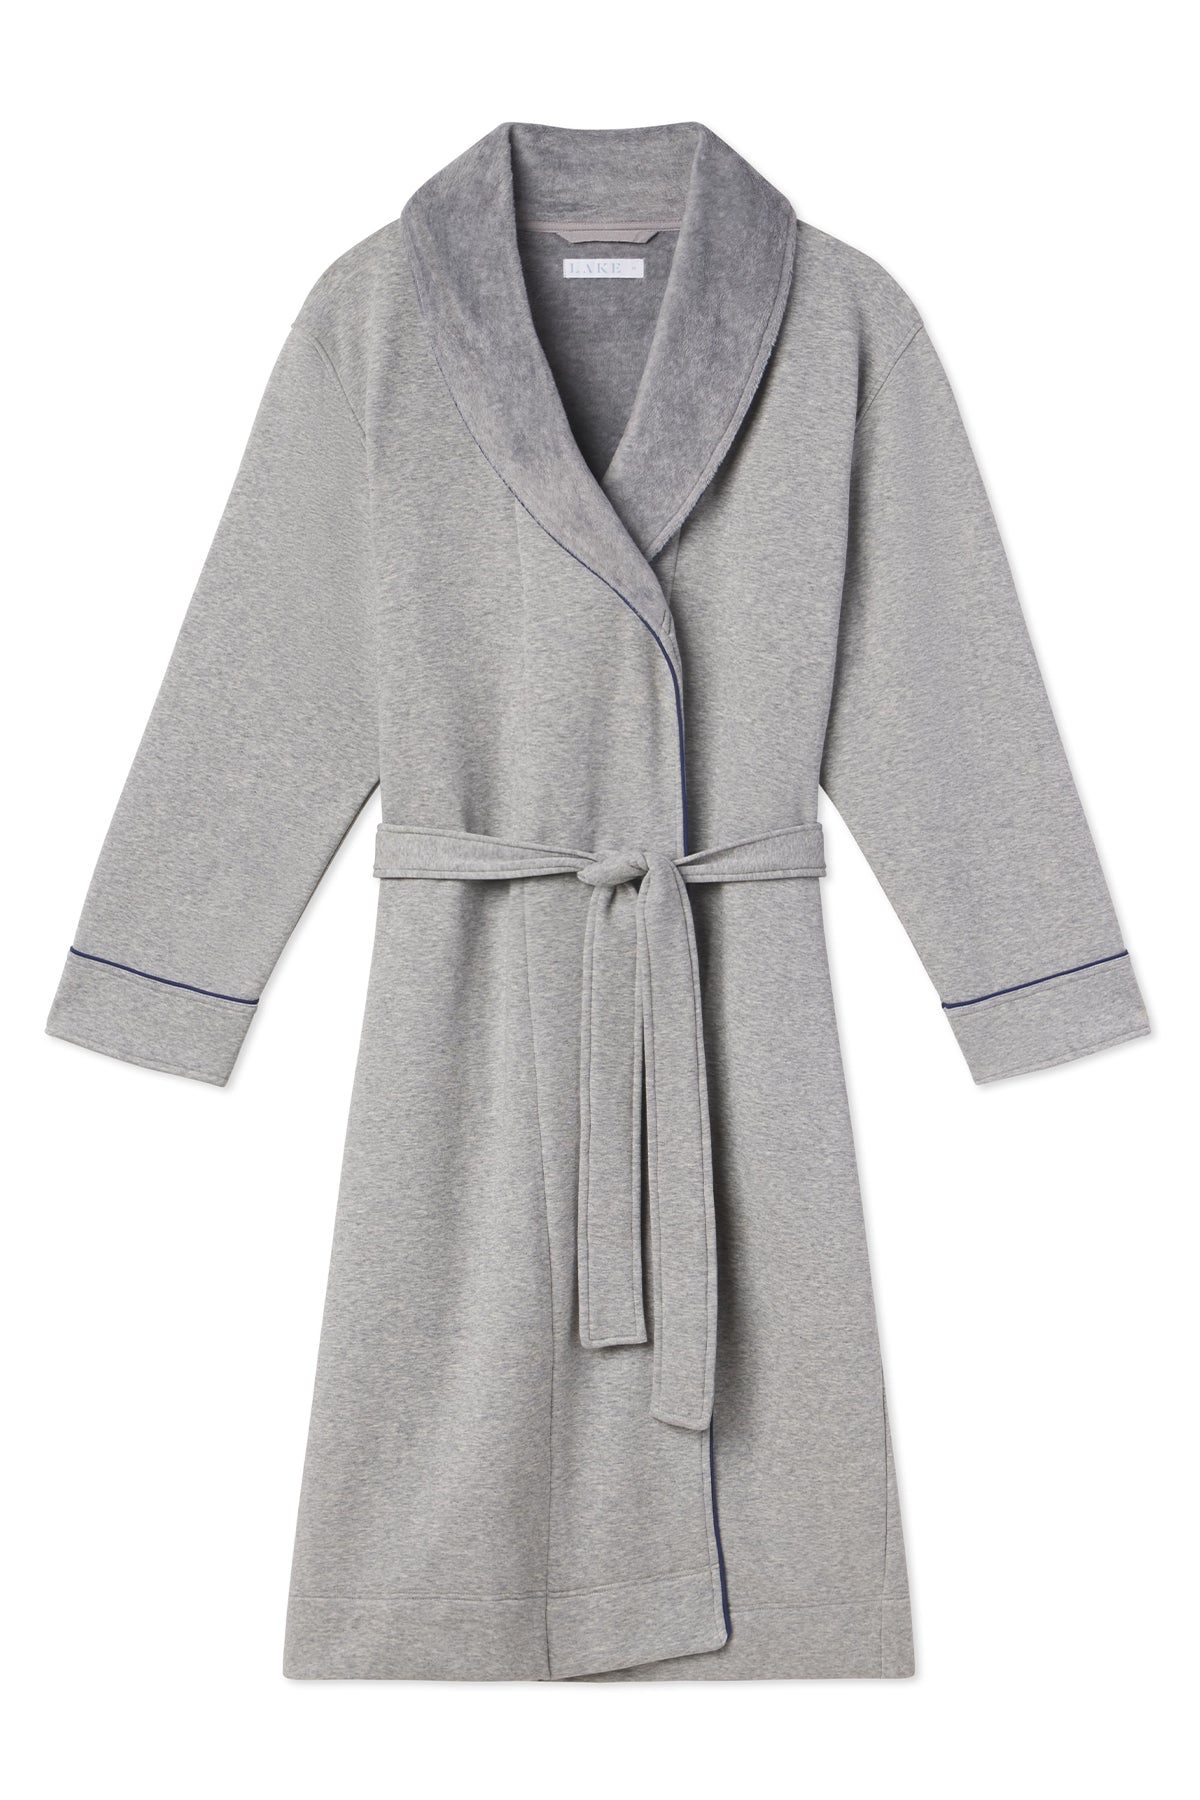 Oyuna - Legere Knitted Dressing Gown - 100% Cashmere - Becker Minty